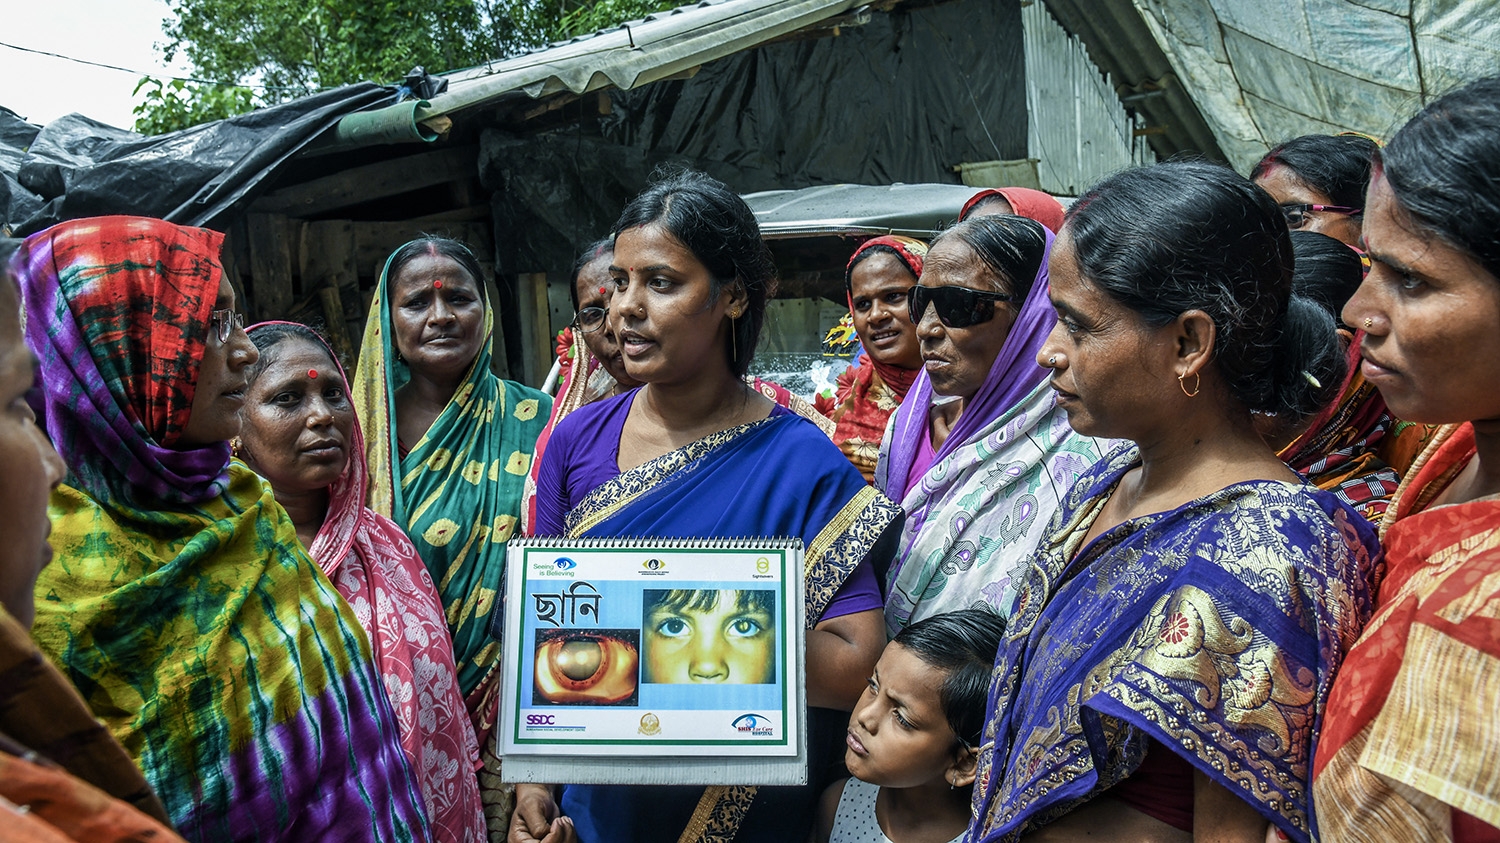 A Lady Health Worker conducts an awareness activity on cataracts for a group of women in the Sundarbans, India.